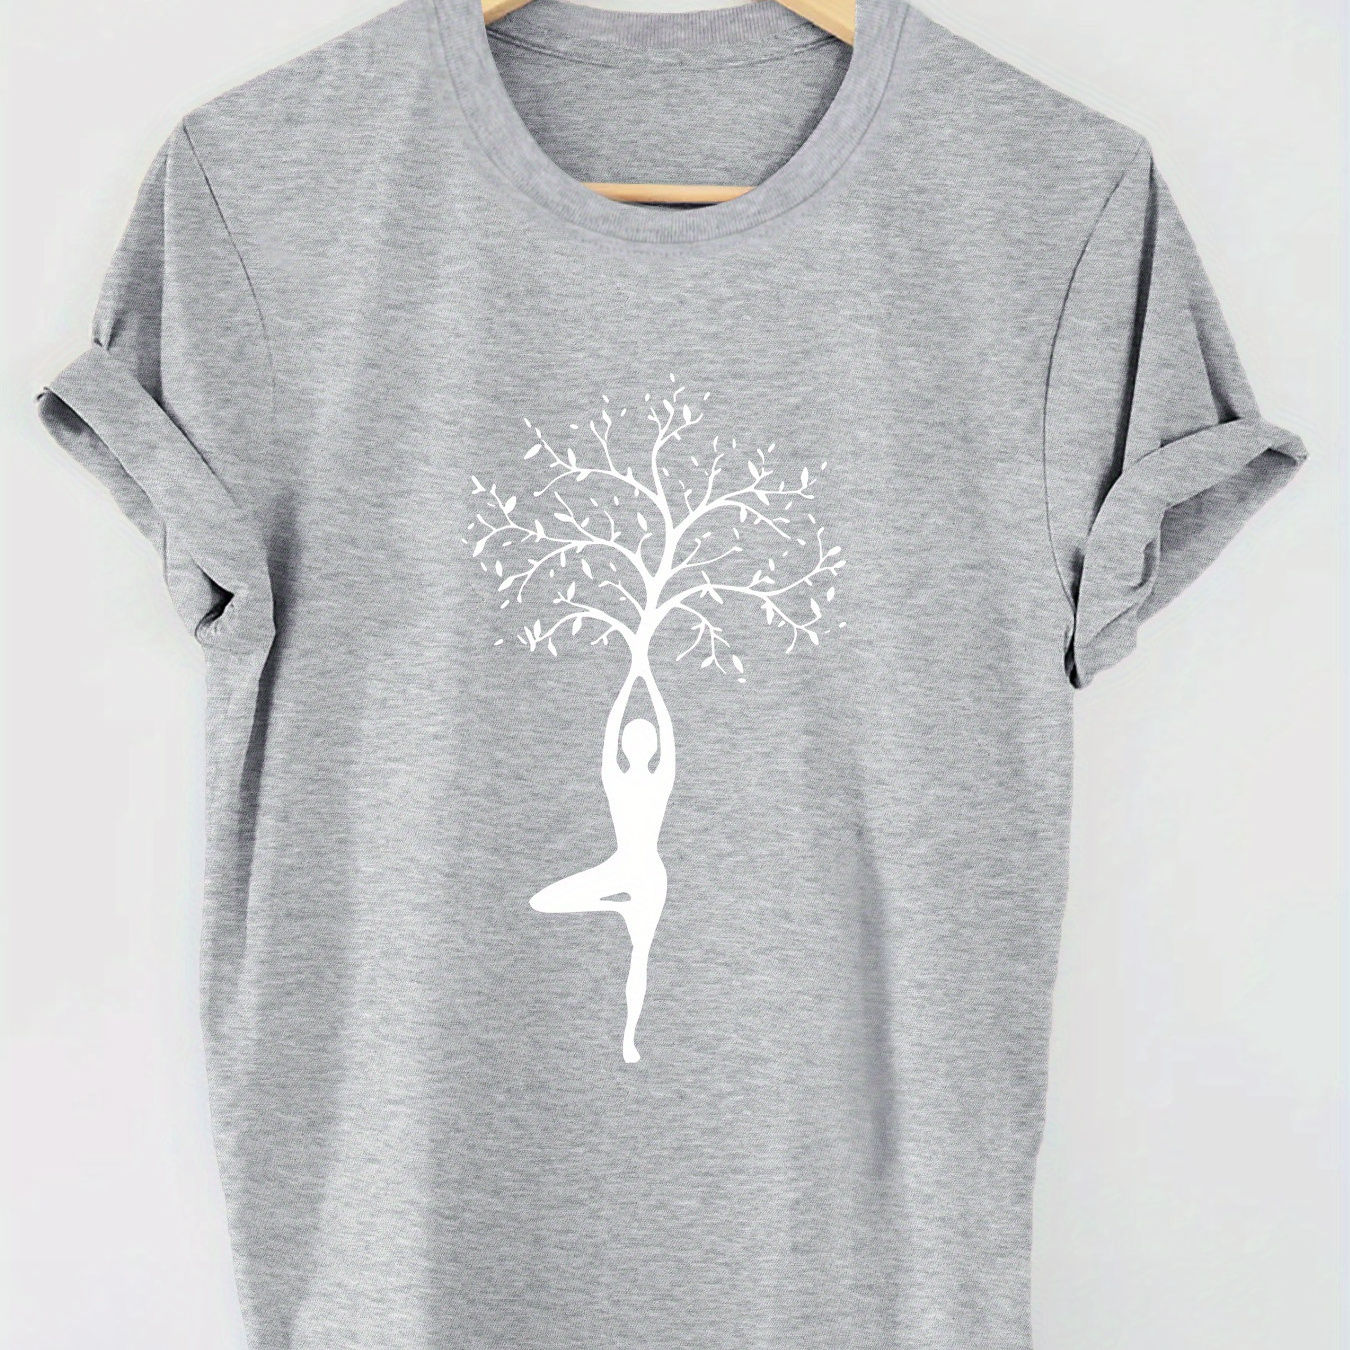 

Yoga Tree Print T-shirt, Short Sleeve Crew Neck Casual Top For Summer & Spring, Women's Clothing